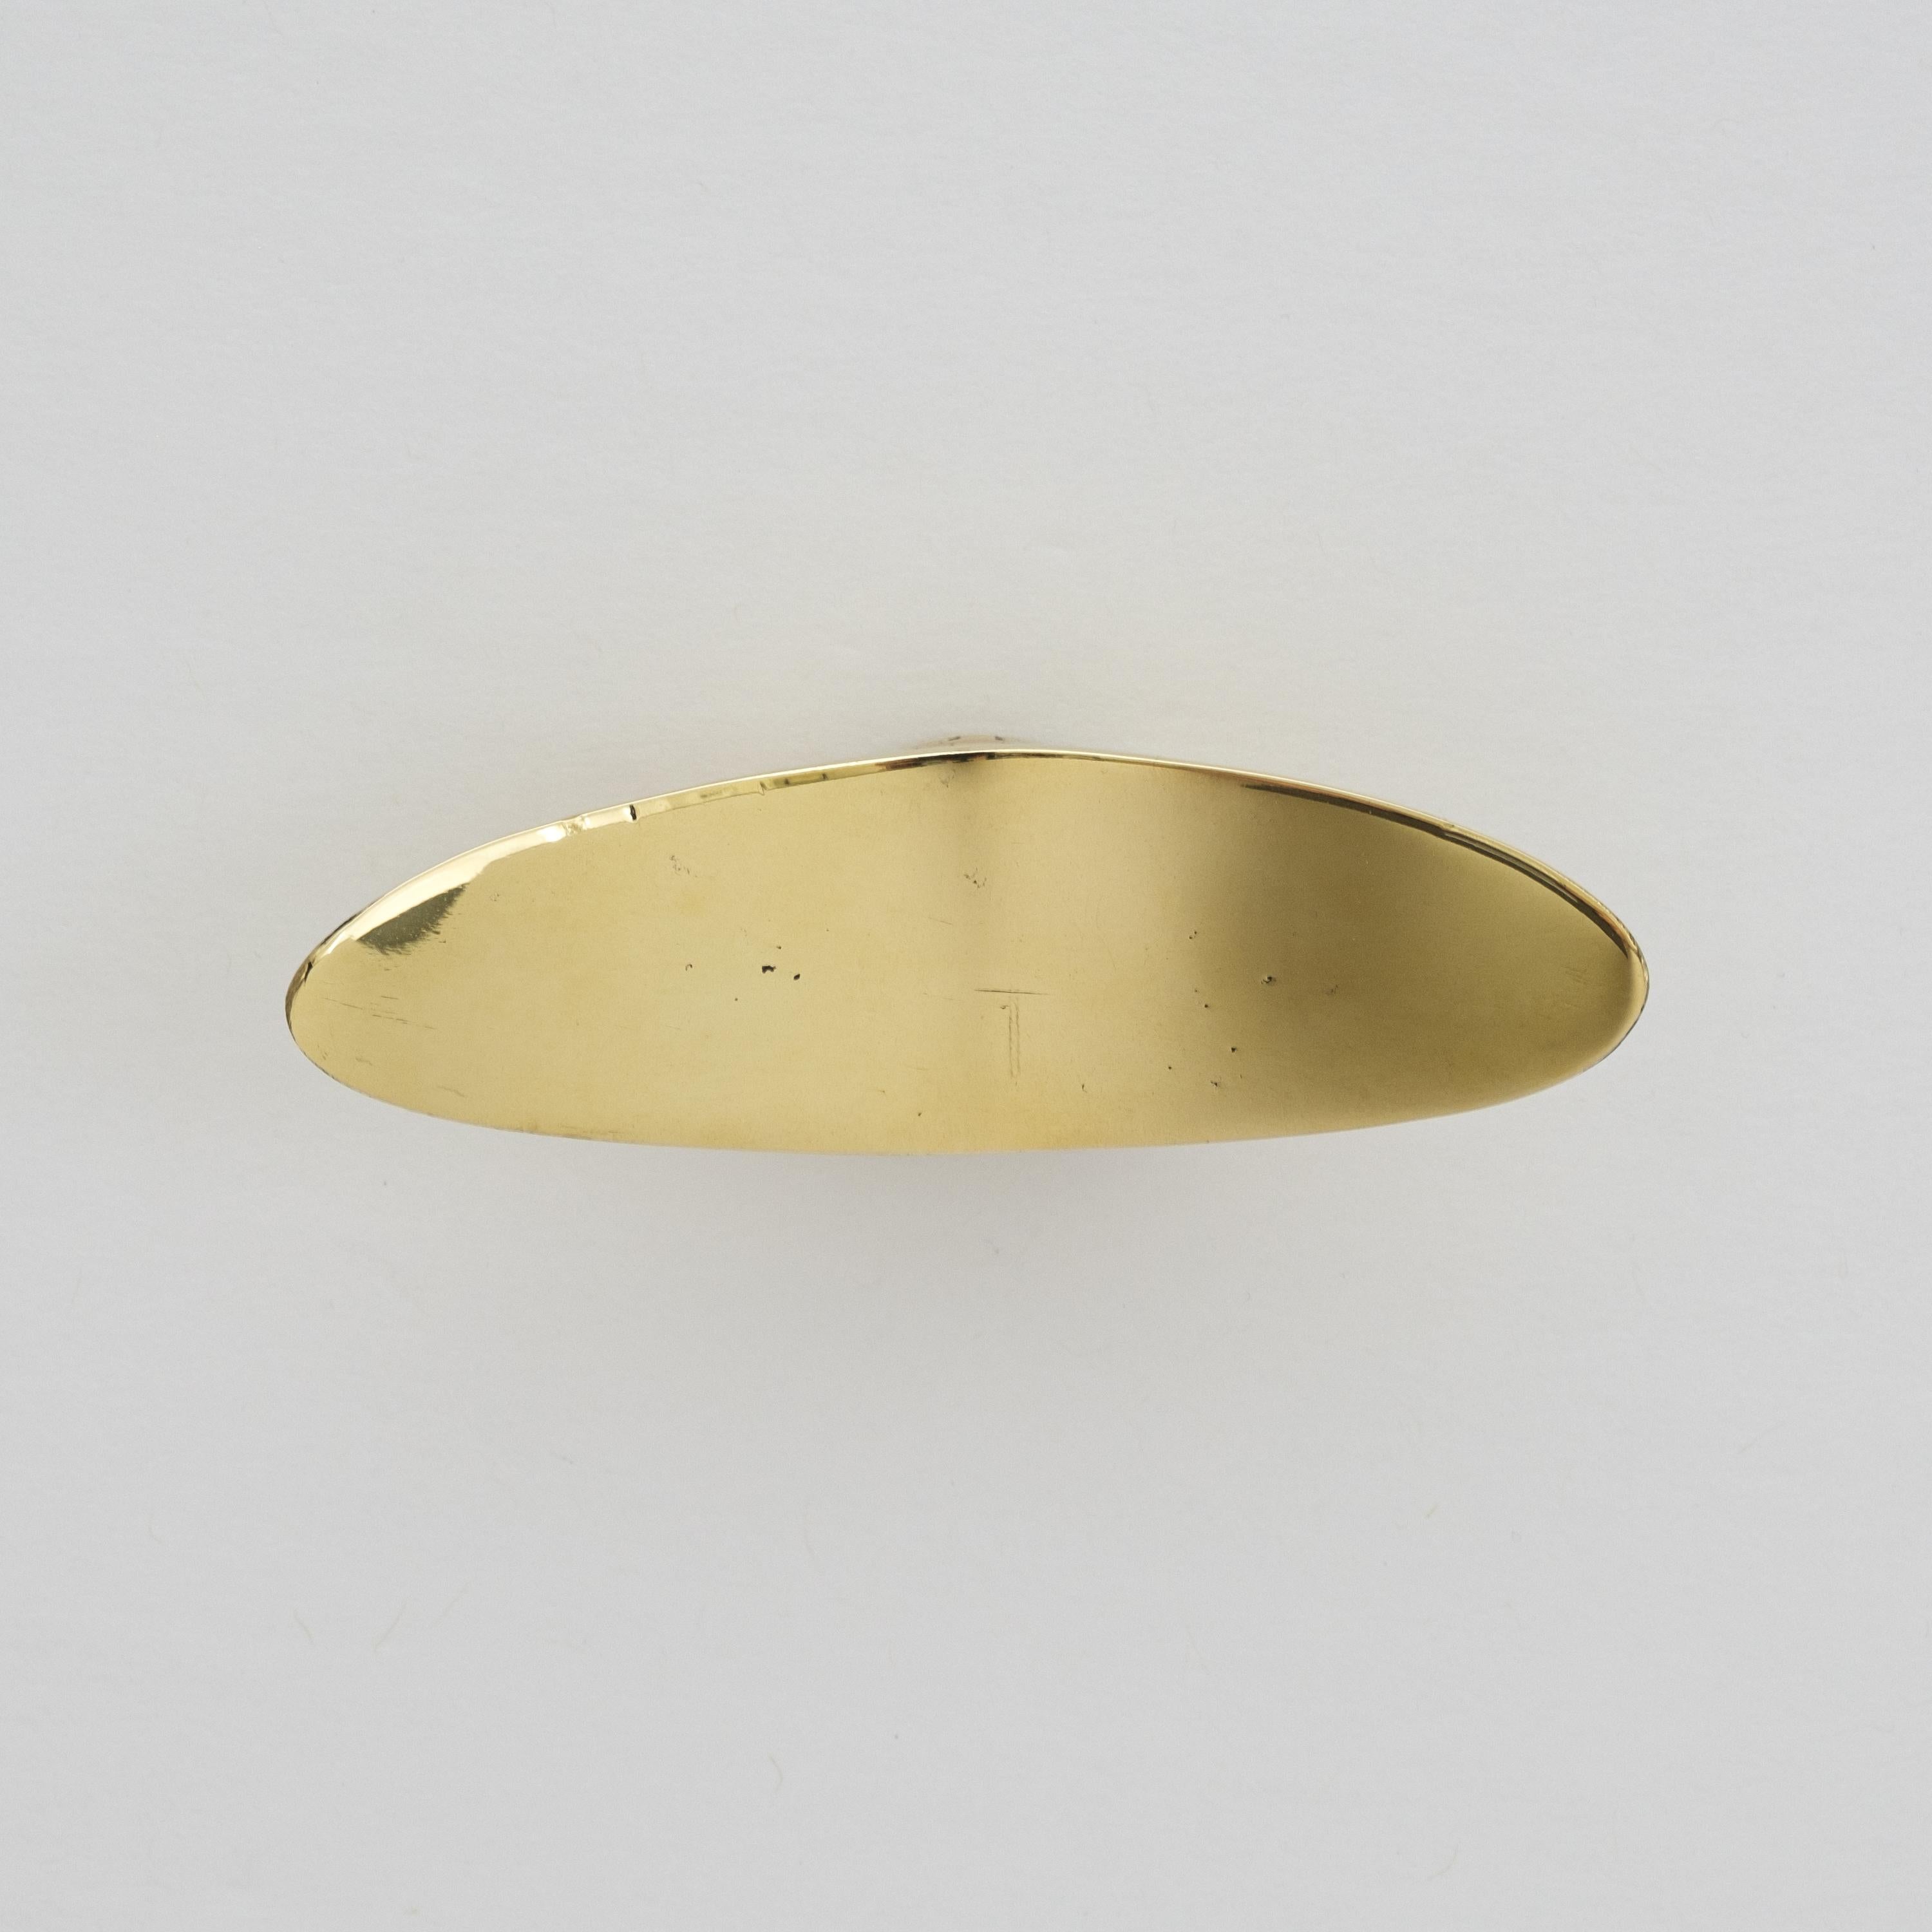 Carl Auböck Model #9070-1 polished brass drawer pull.

Designed in the 1950s, this versatile and Minimalist Viennese drawer pull is executed in polished brass by Werkstätte Carl Auböck, Austria. Its minimalist design combines clean form with